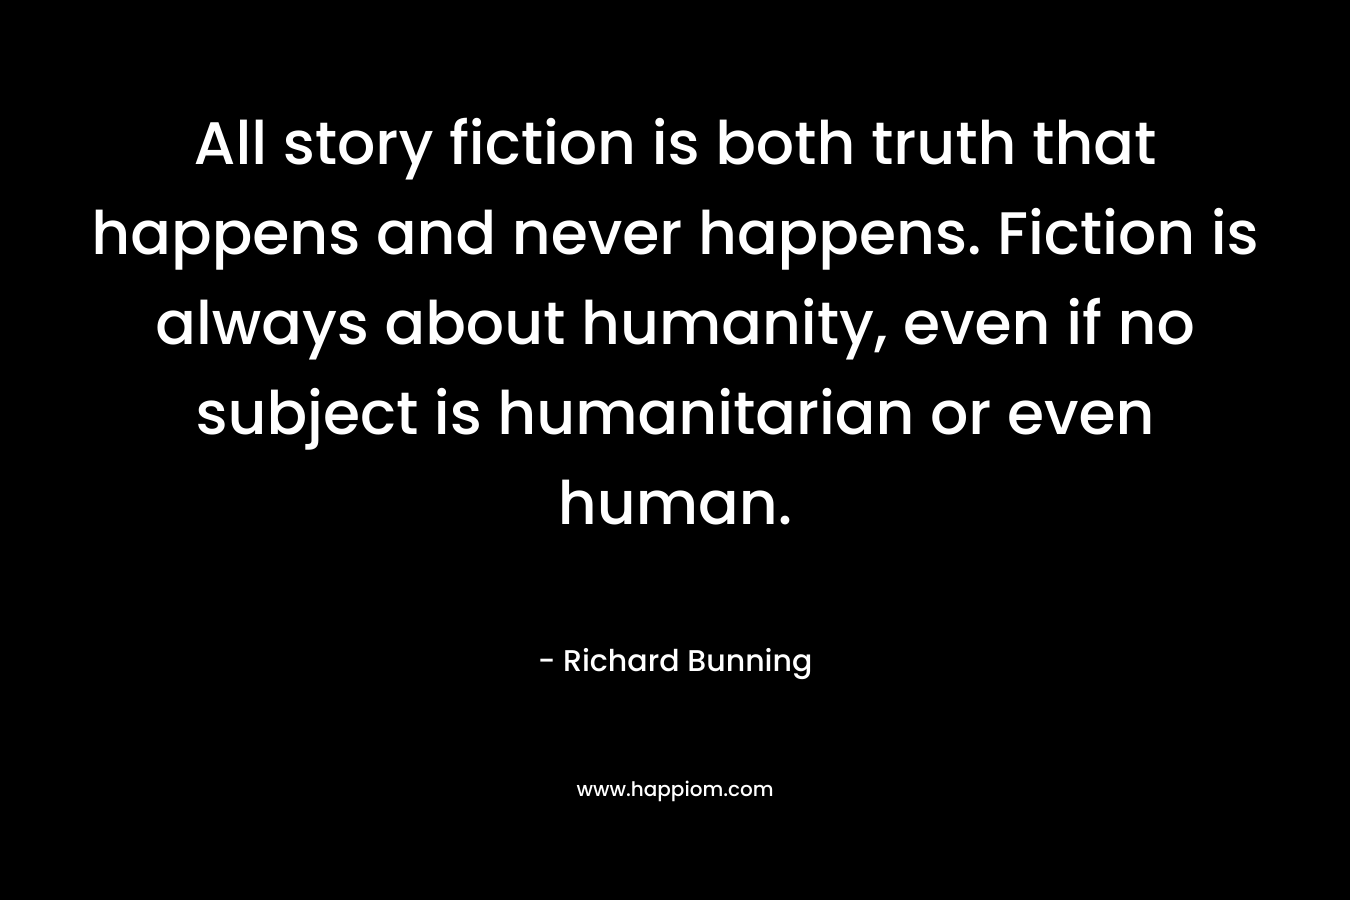 All story fiction is both truth that happens and never happens. Fiction is always about humanity, even if no subject is humanitarian or even human.